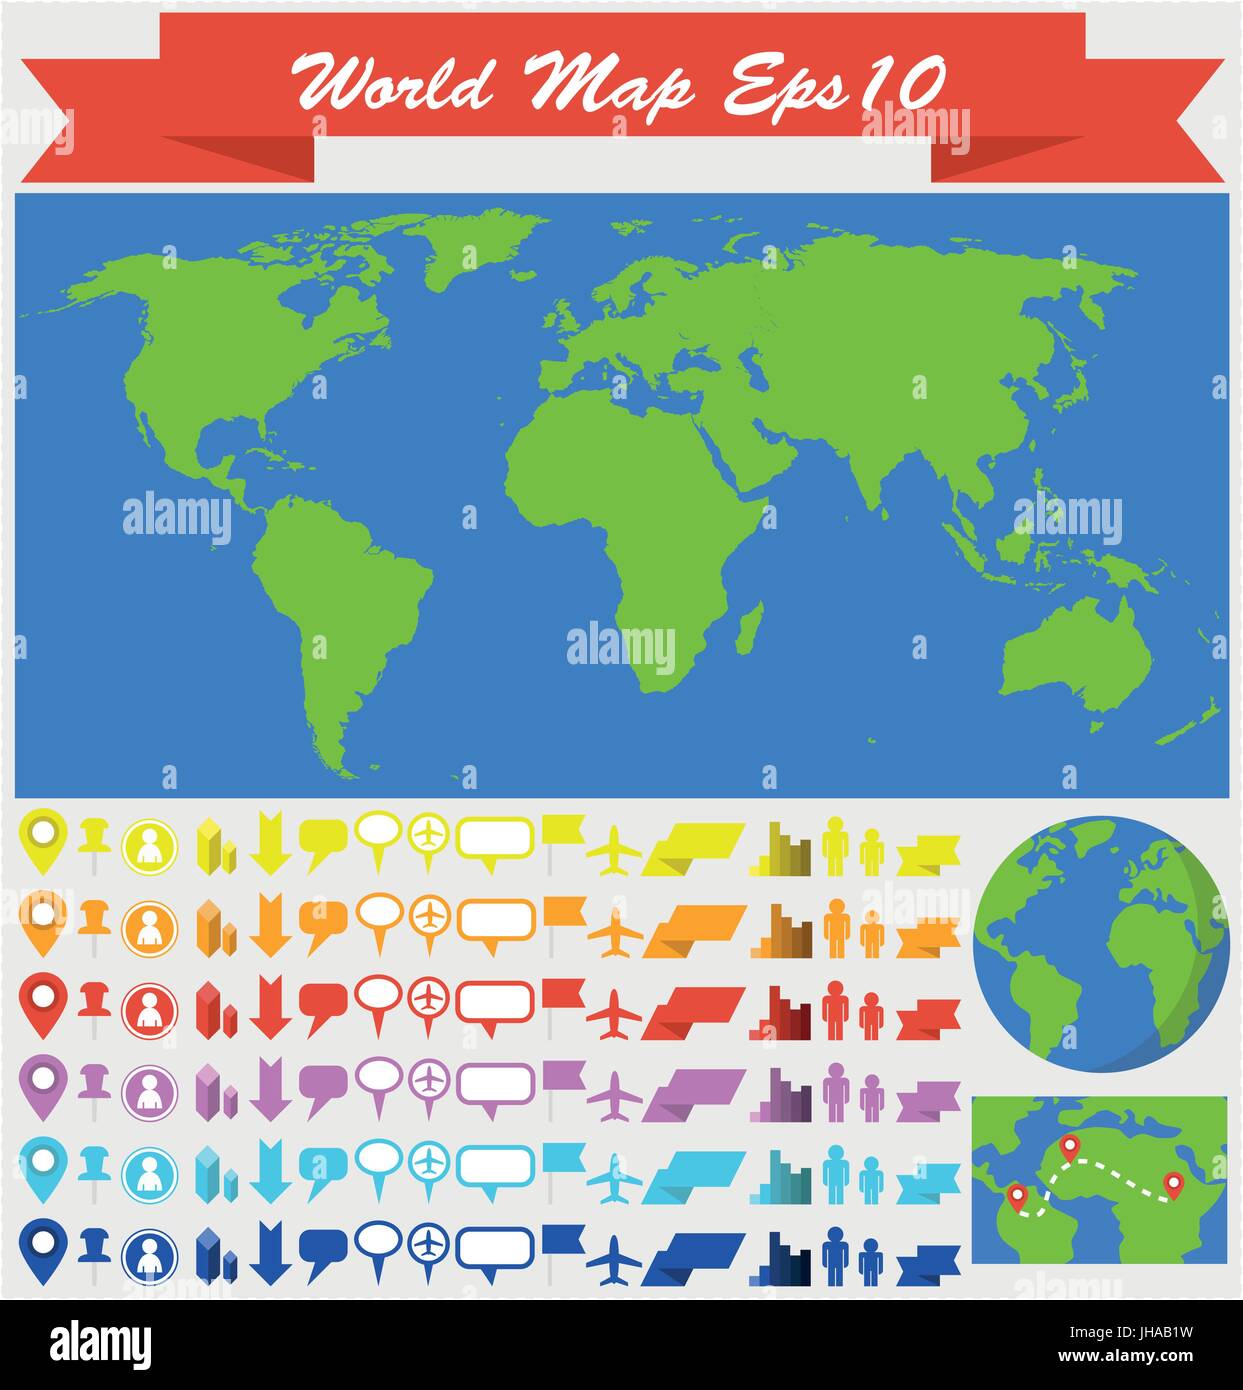 world map infographic illustration - web icon collection Stock Vector